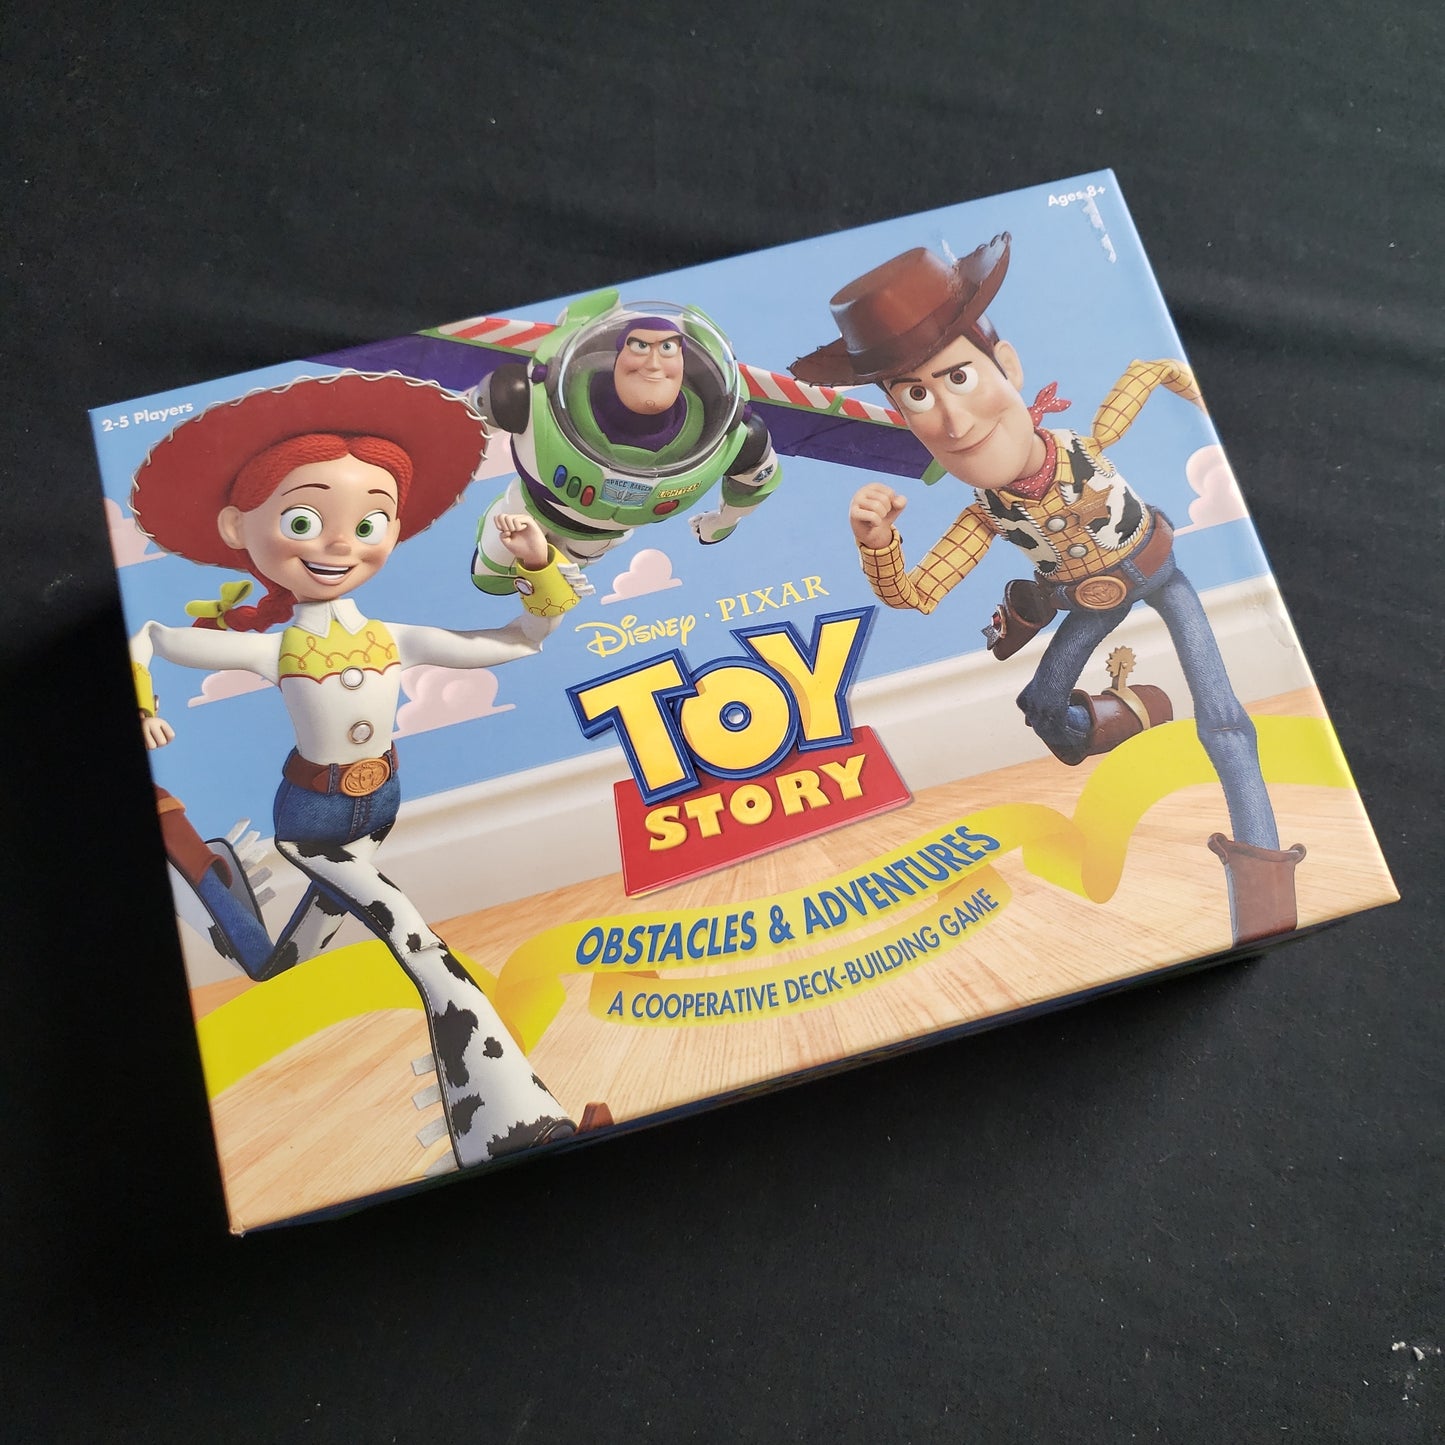 Image shows the front cover of the box of the Toy Story: Obstacles and Adventures card game